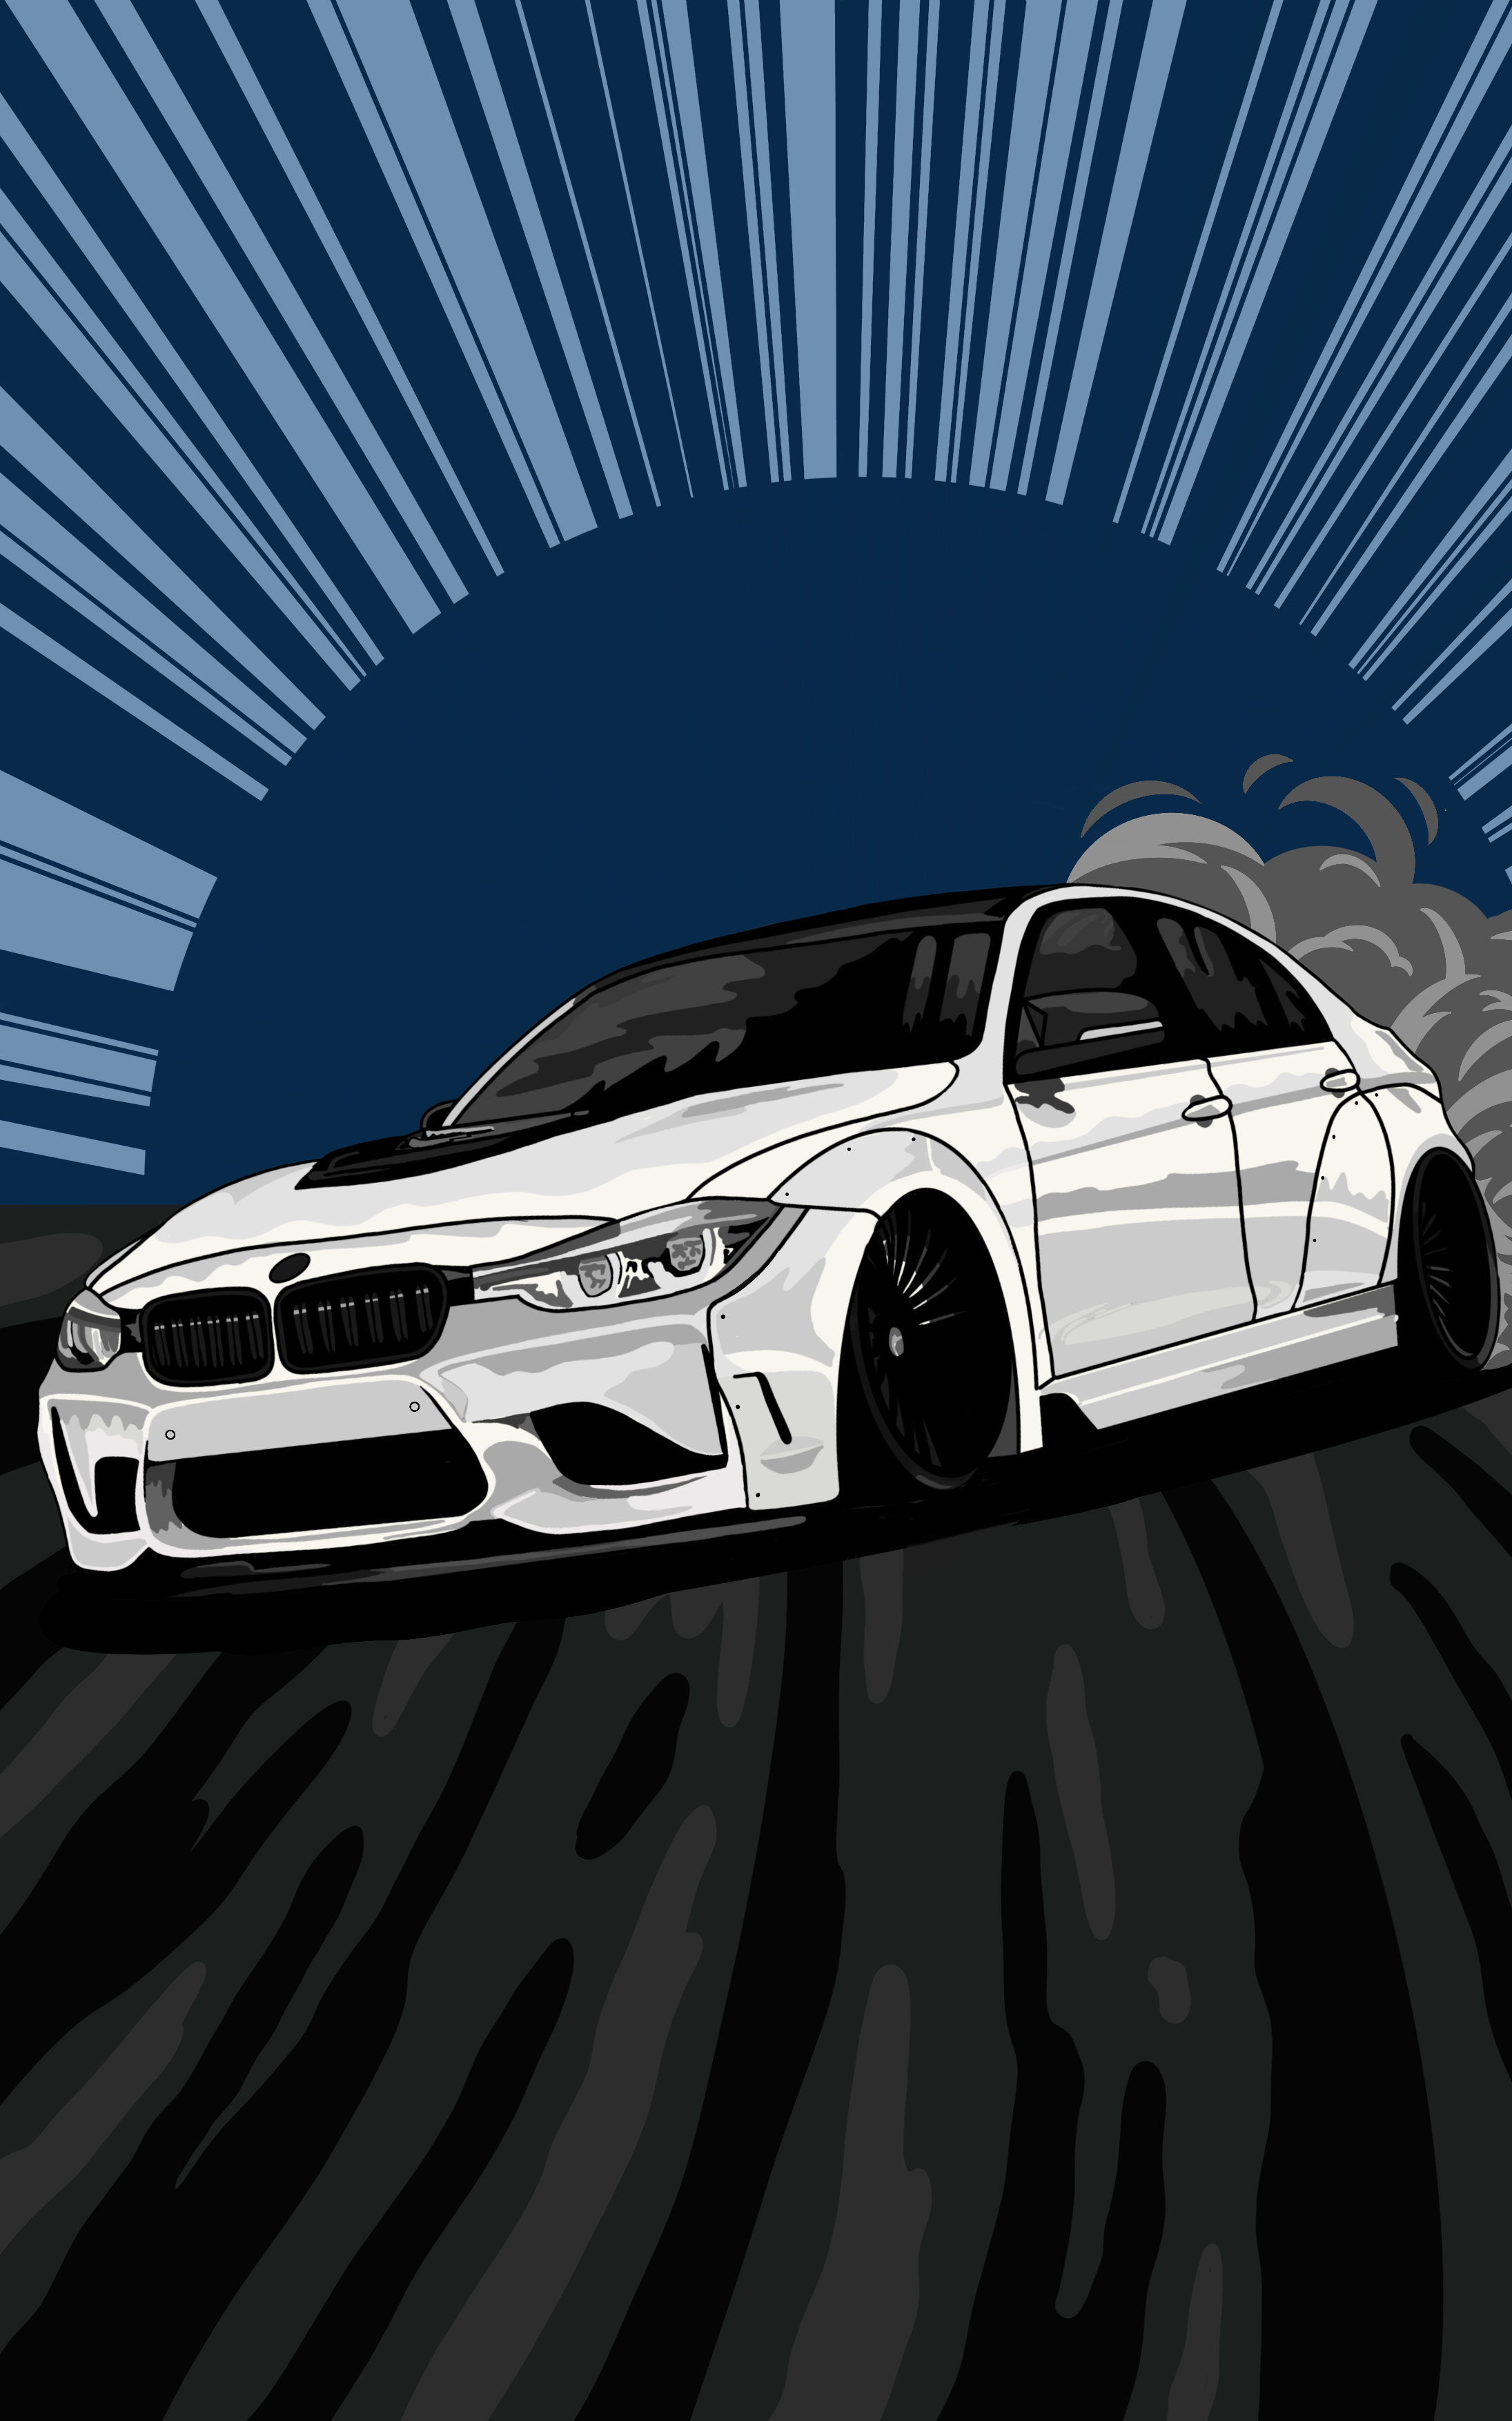 Illustration of a BMW car on the road with a blue sky